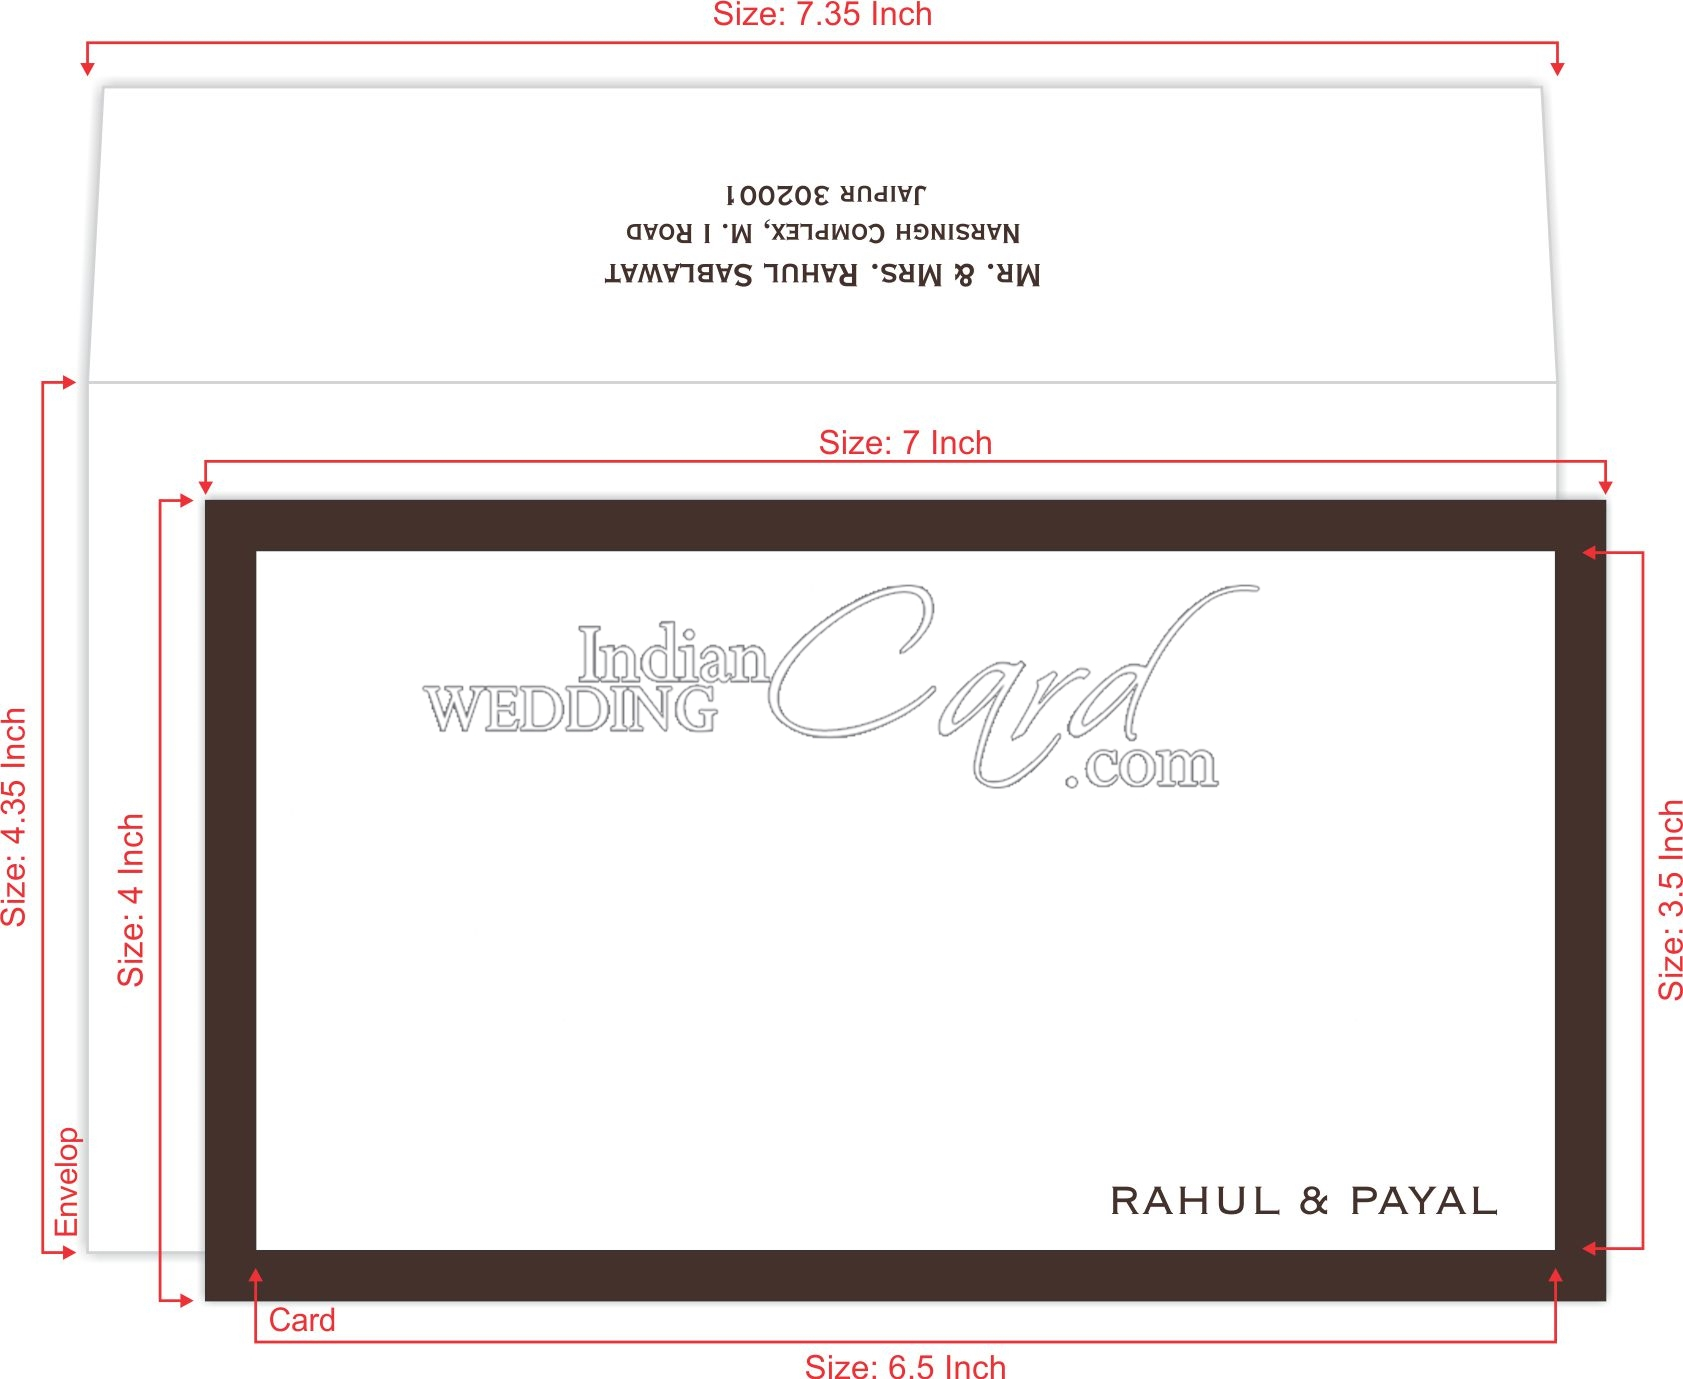 Why Should We Send Wedding Thank You Cards? | Indian Wedding With Wedding Card Size Template